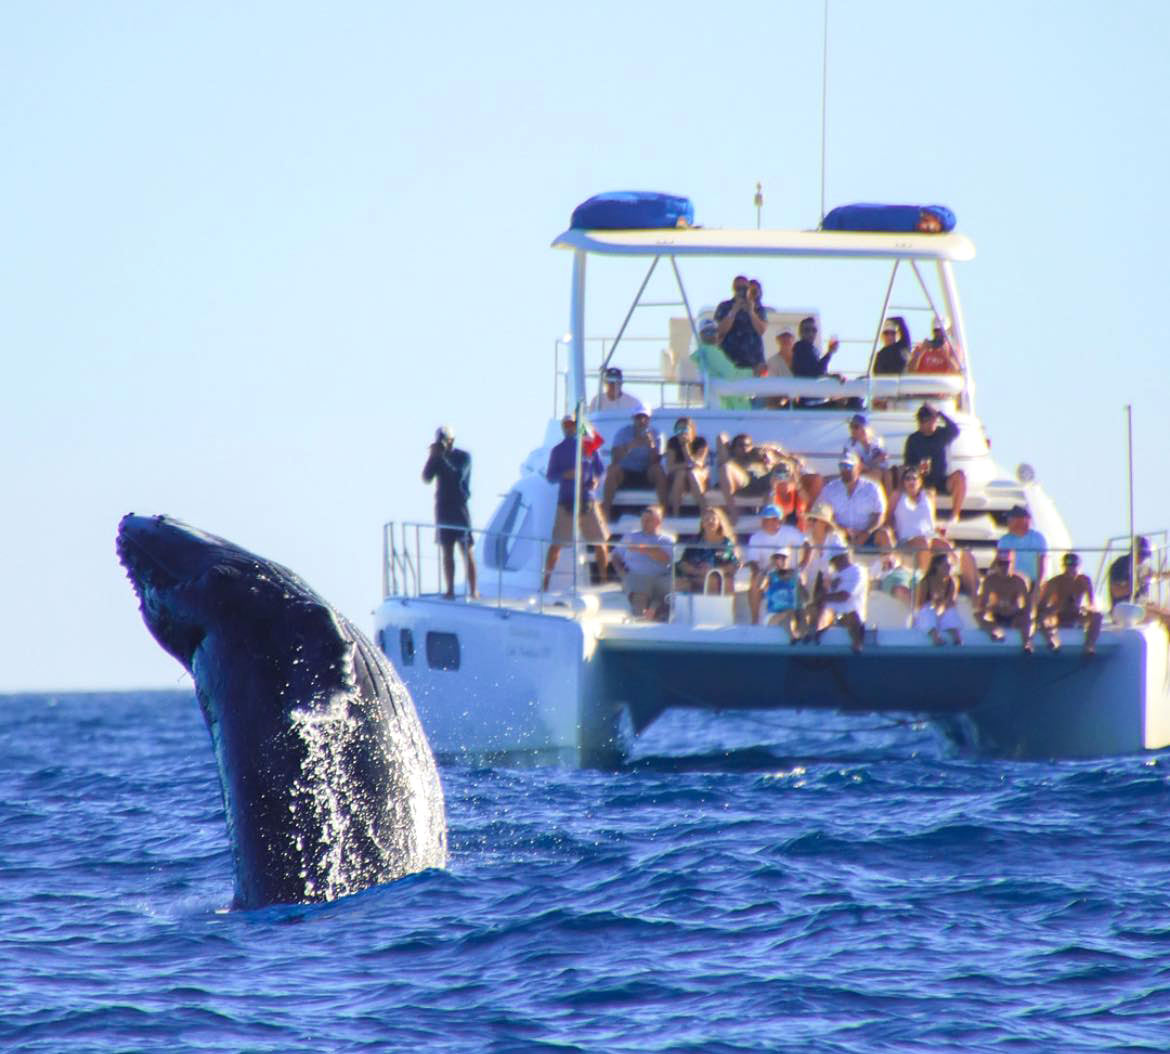 Whale watching in Cabo San Lucas from a luxury catamaran